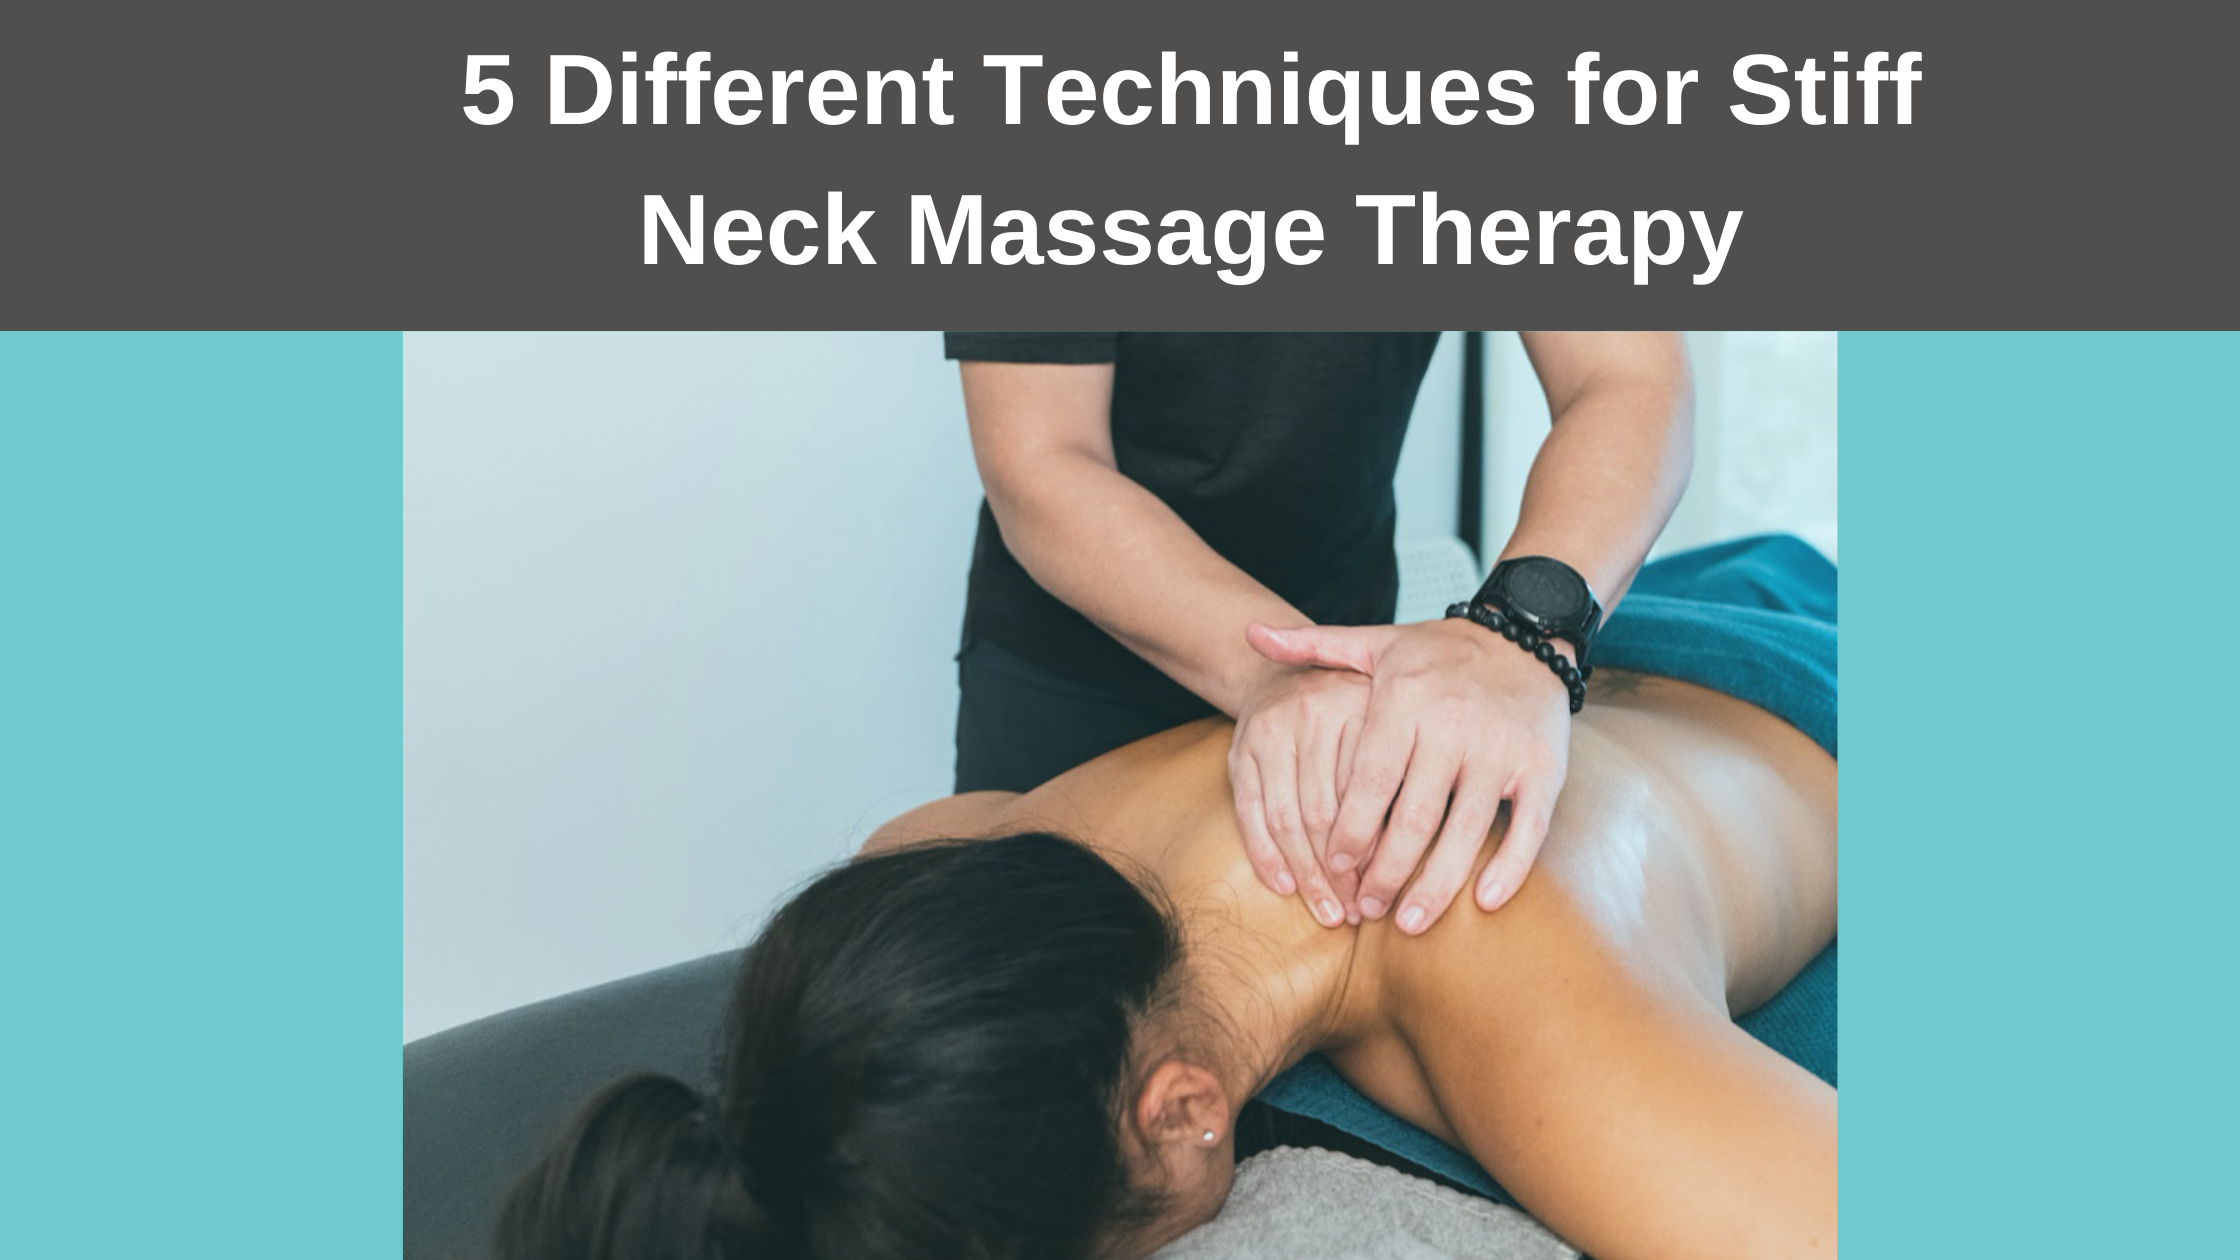 5 Different Techniques for Stiff Neck Massage Therapy - AtoAllinks